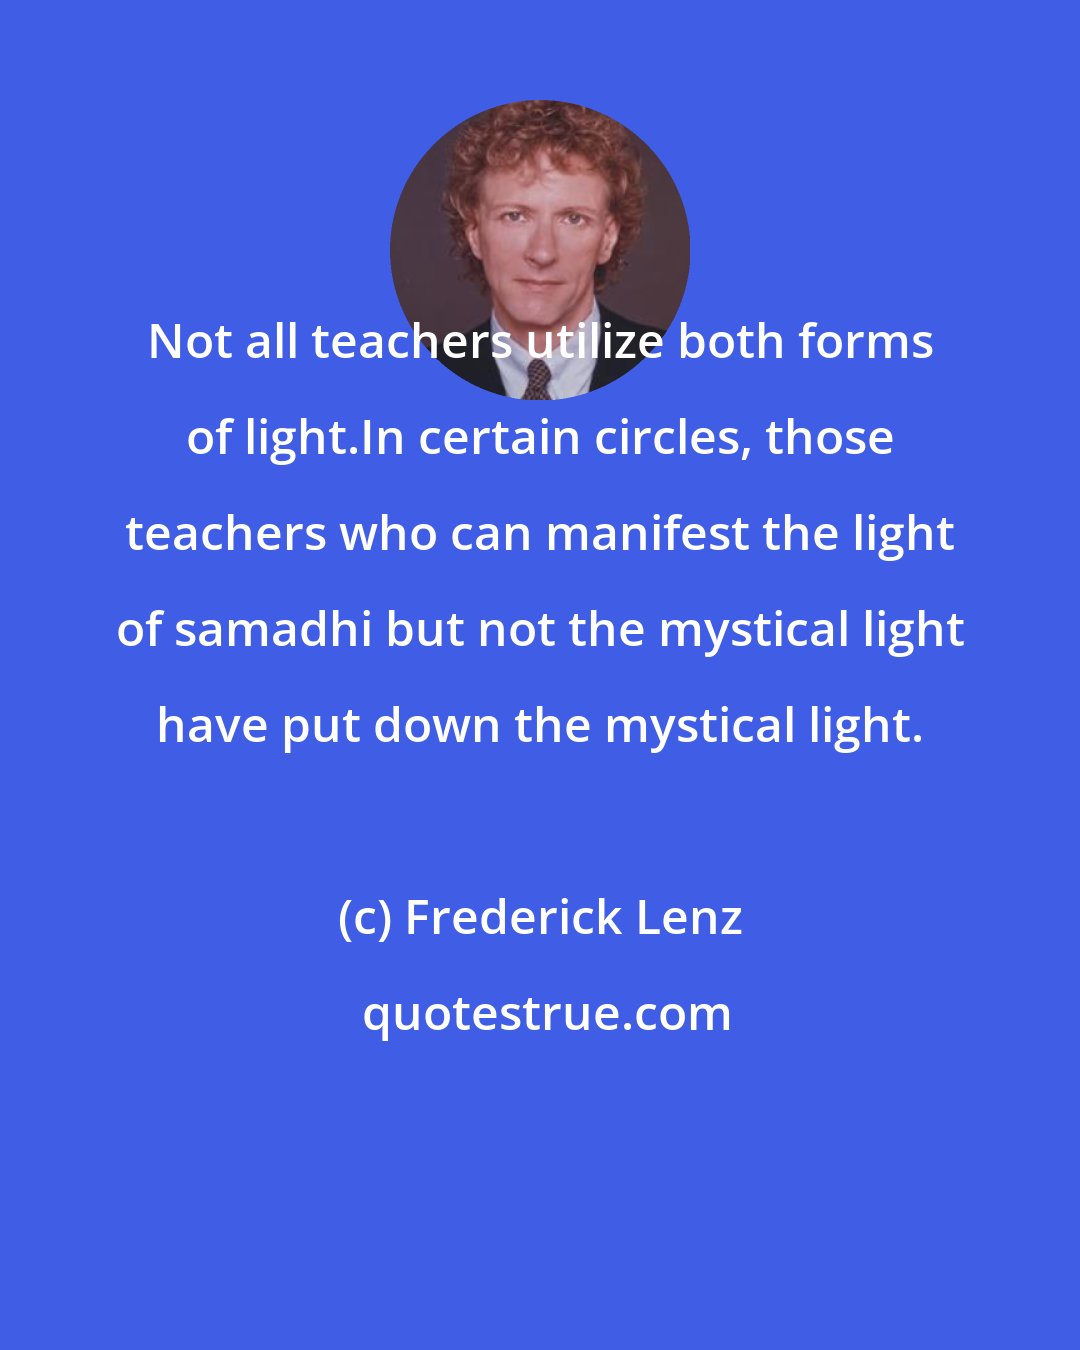 Frederick Lenz: Not all teachers utilize both forms of light.In certain circles, those teachers who can manifest the light of samadhi but not the mystical light have put down the mystical light.